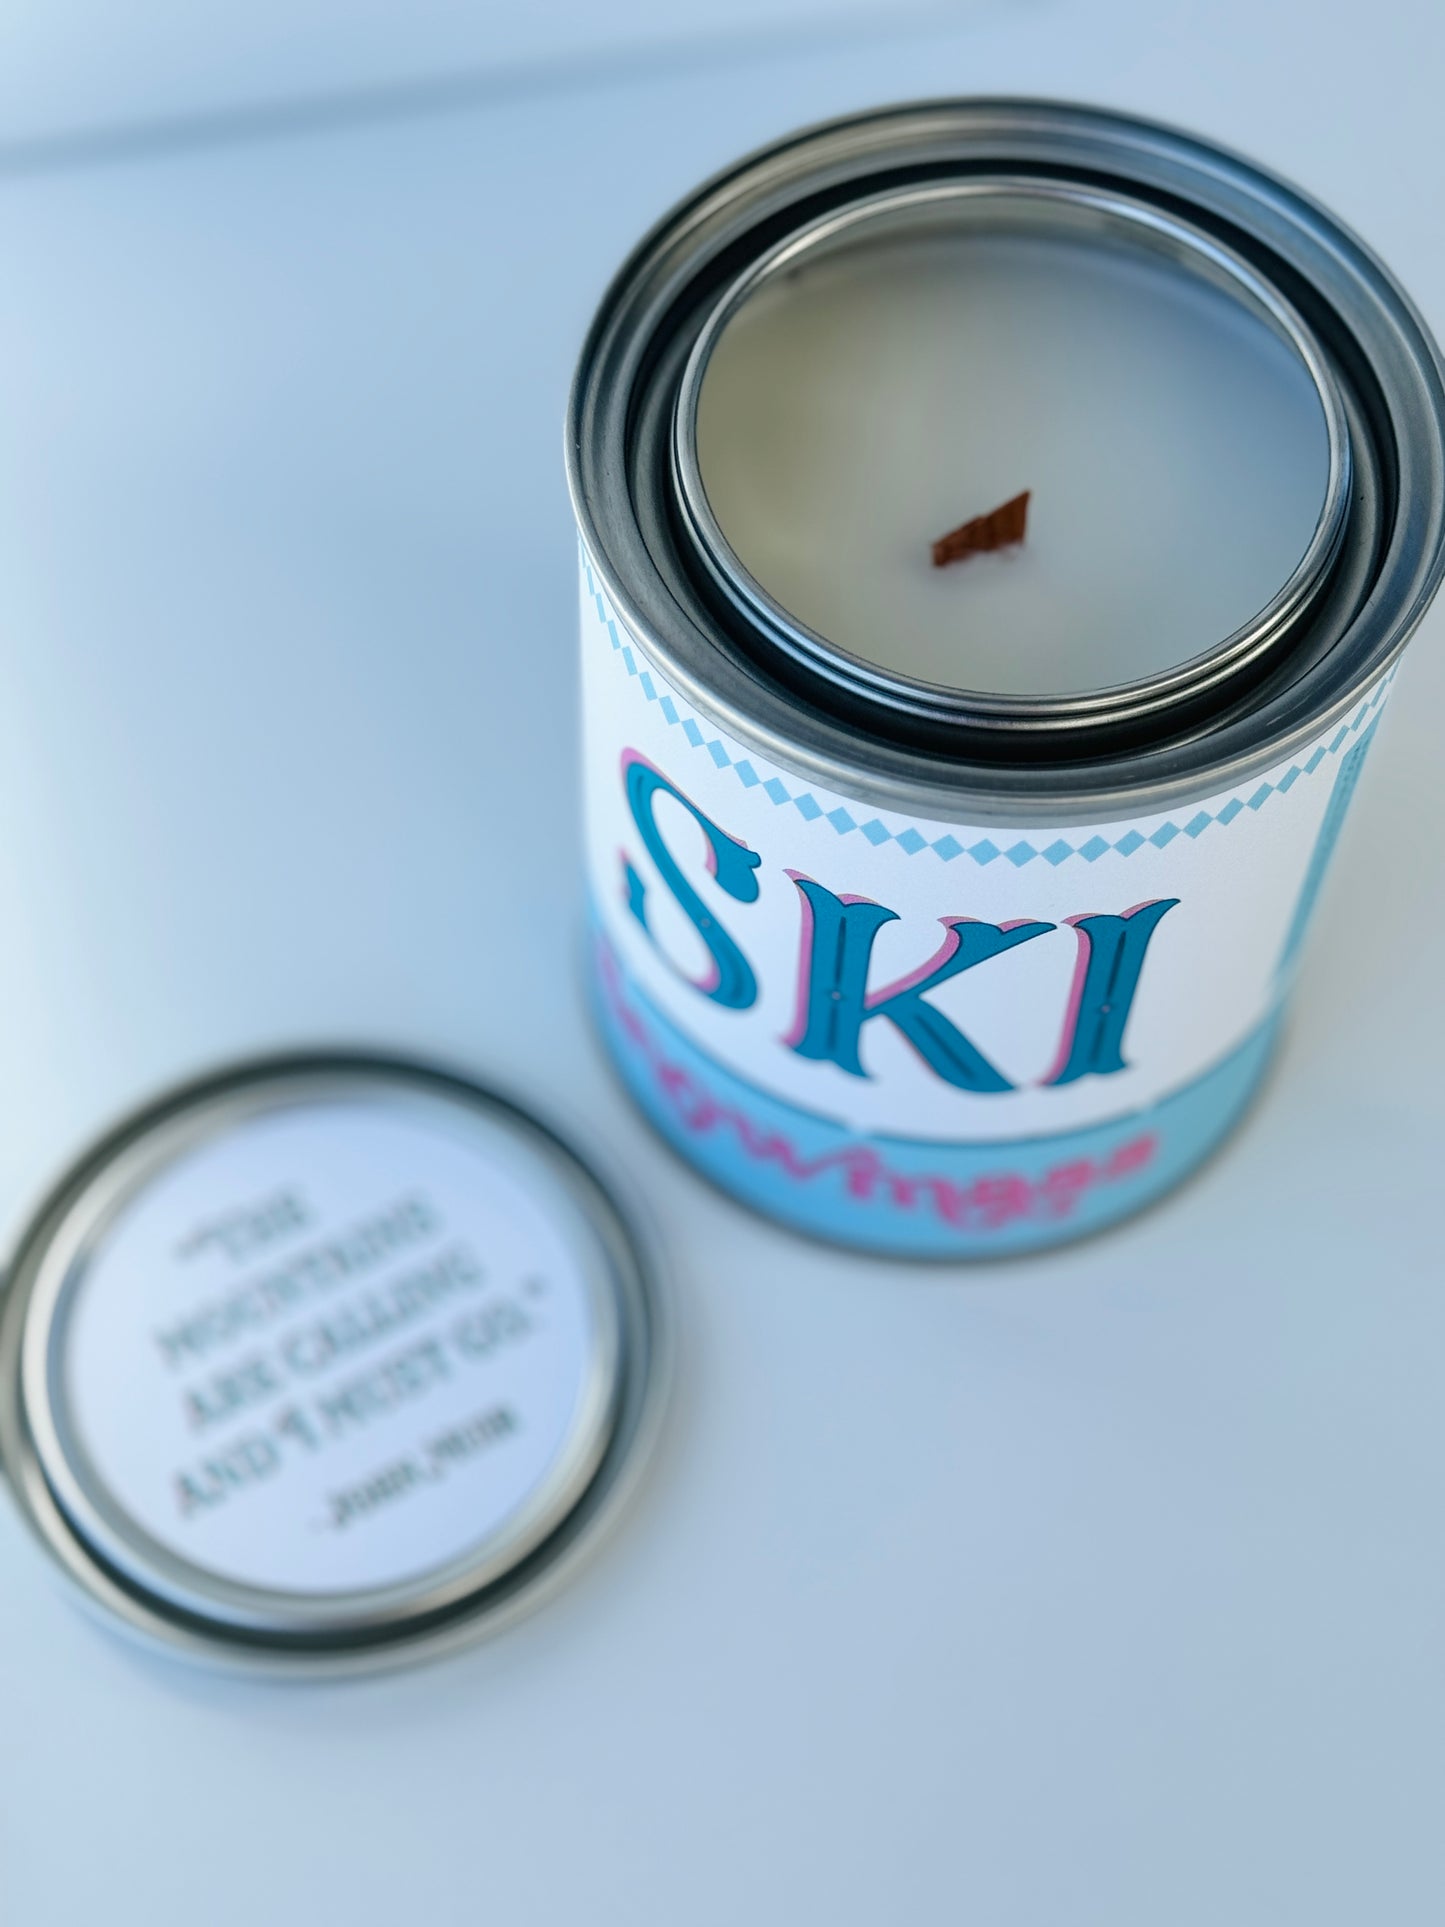 Hike Bear Valley - Paint Tin Candle